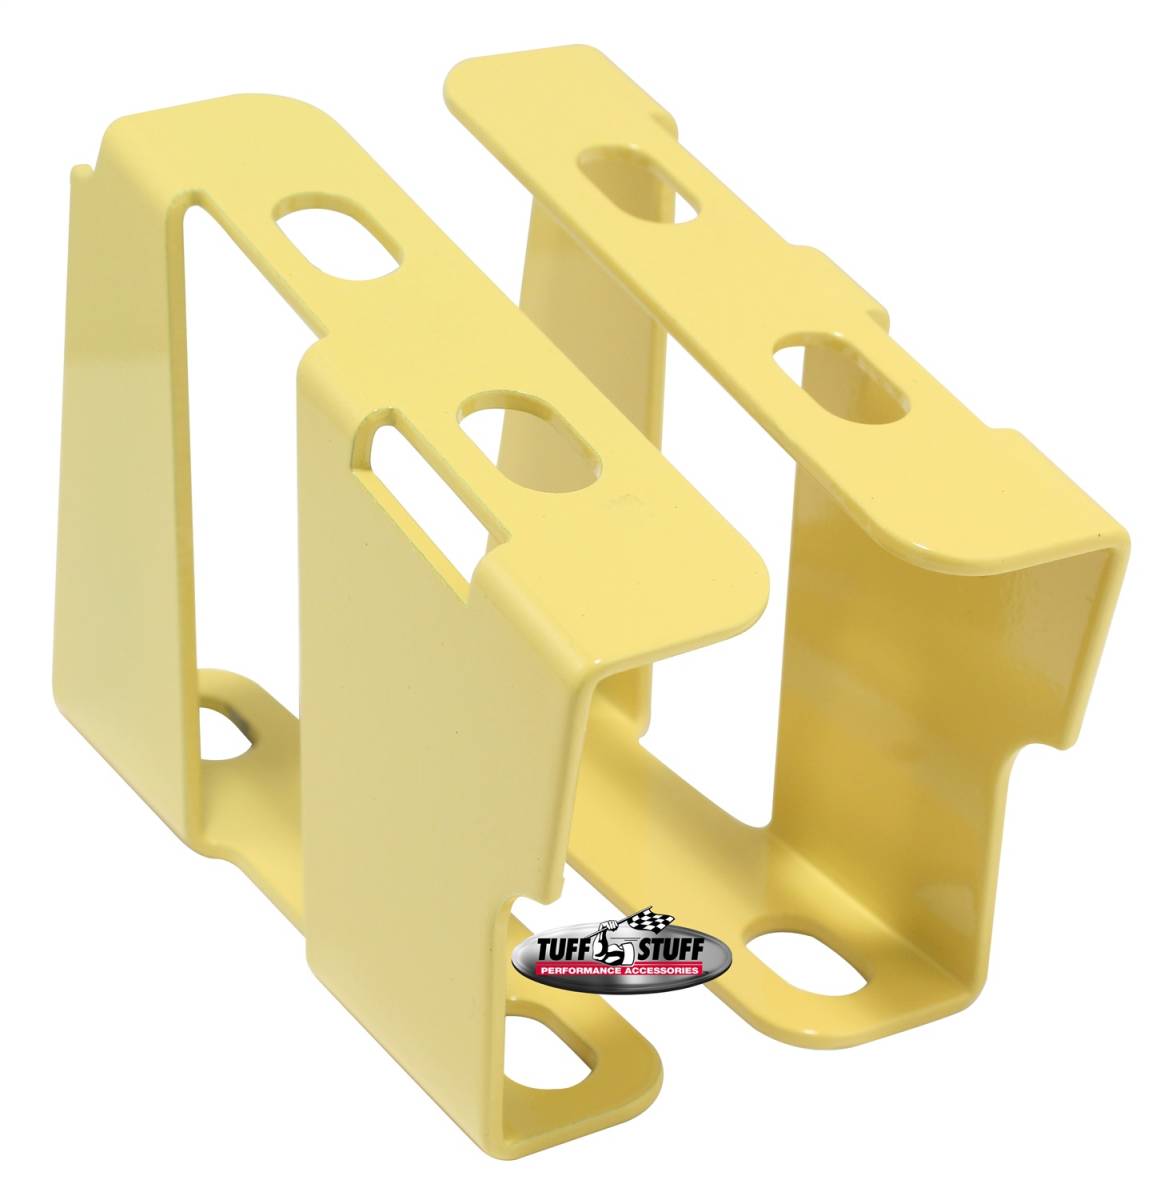 Tuff Stuff Performance - Brake Booster Brackets Incl. Left And Right Side 1955-1964 GM For Brake Booster PN[2121/2122/2123/2124/2221/2222/2223/2228/2229/2231] Yellow 4651BYELLOW